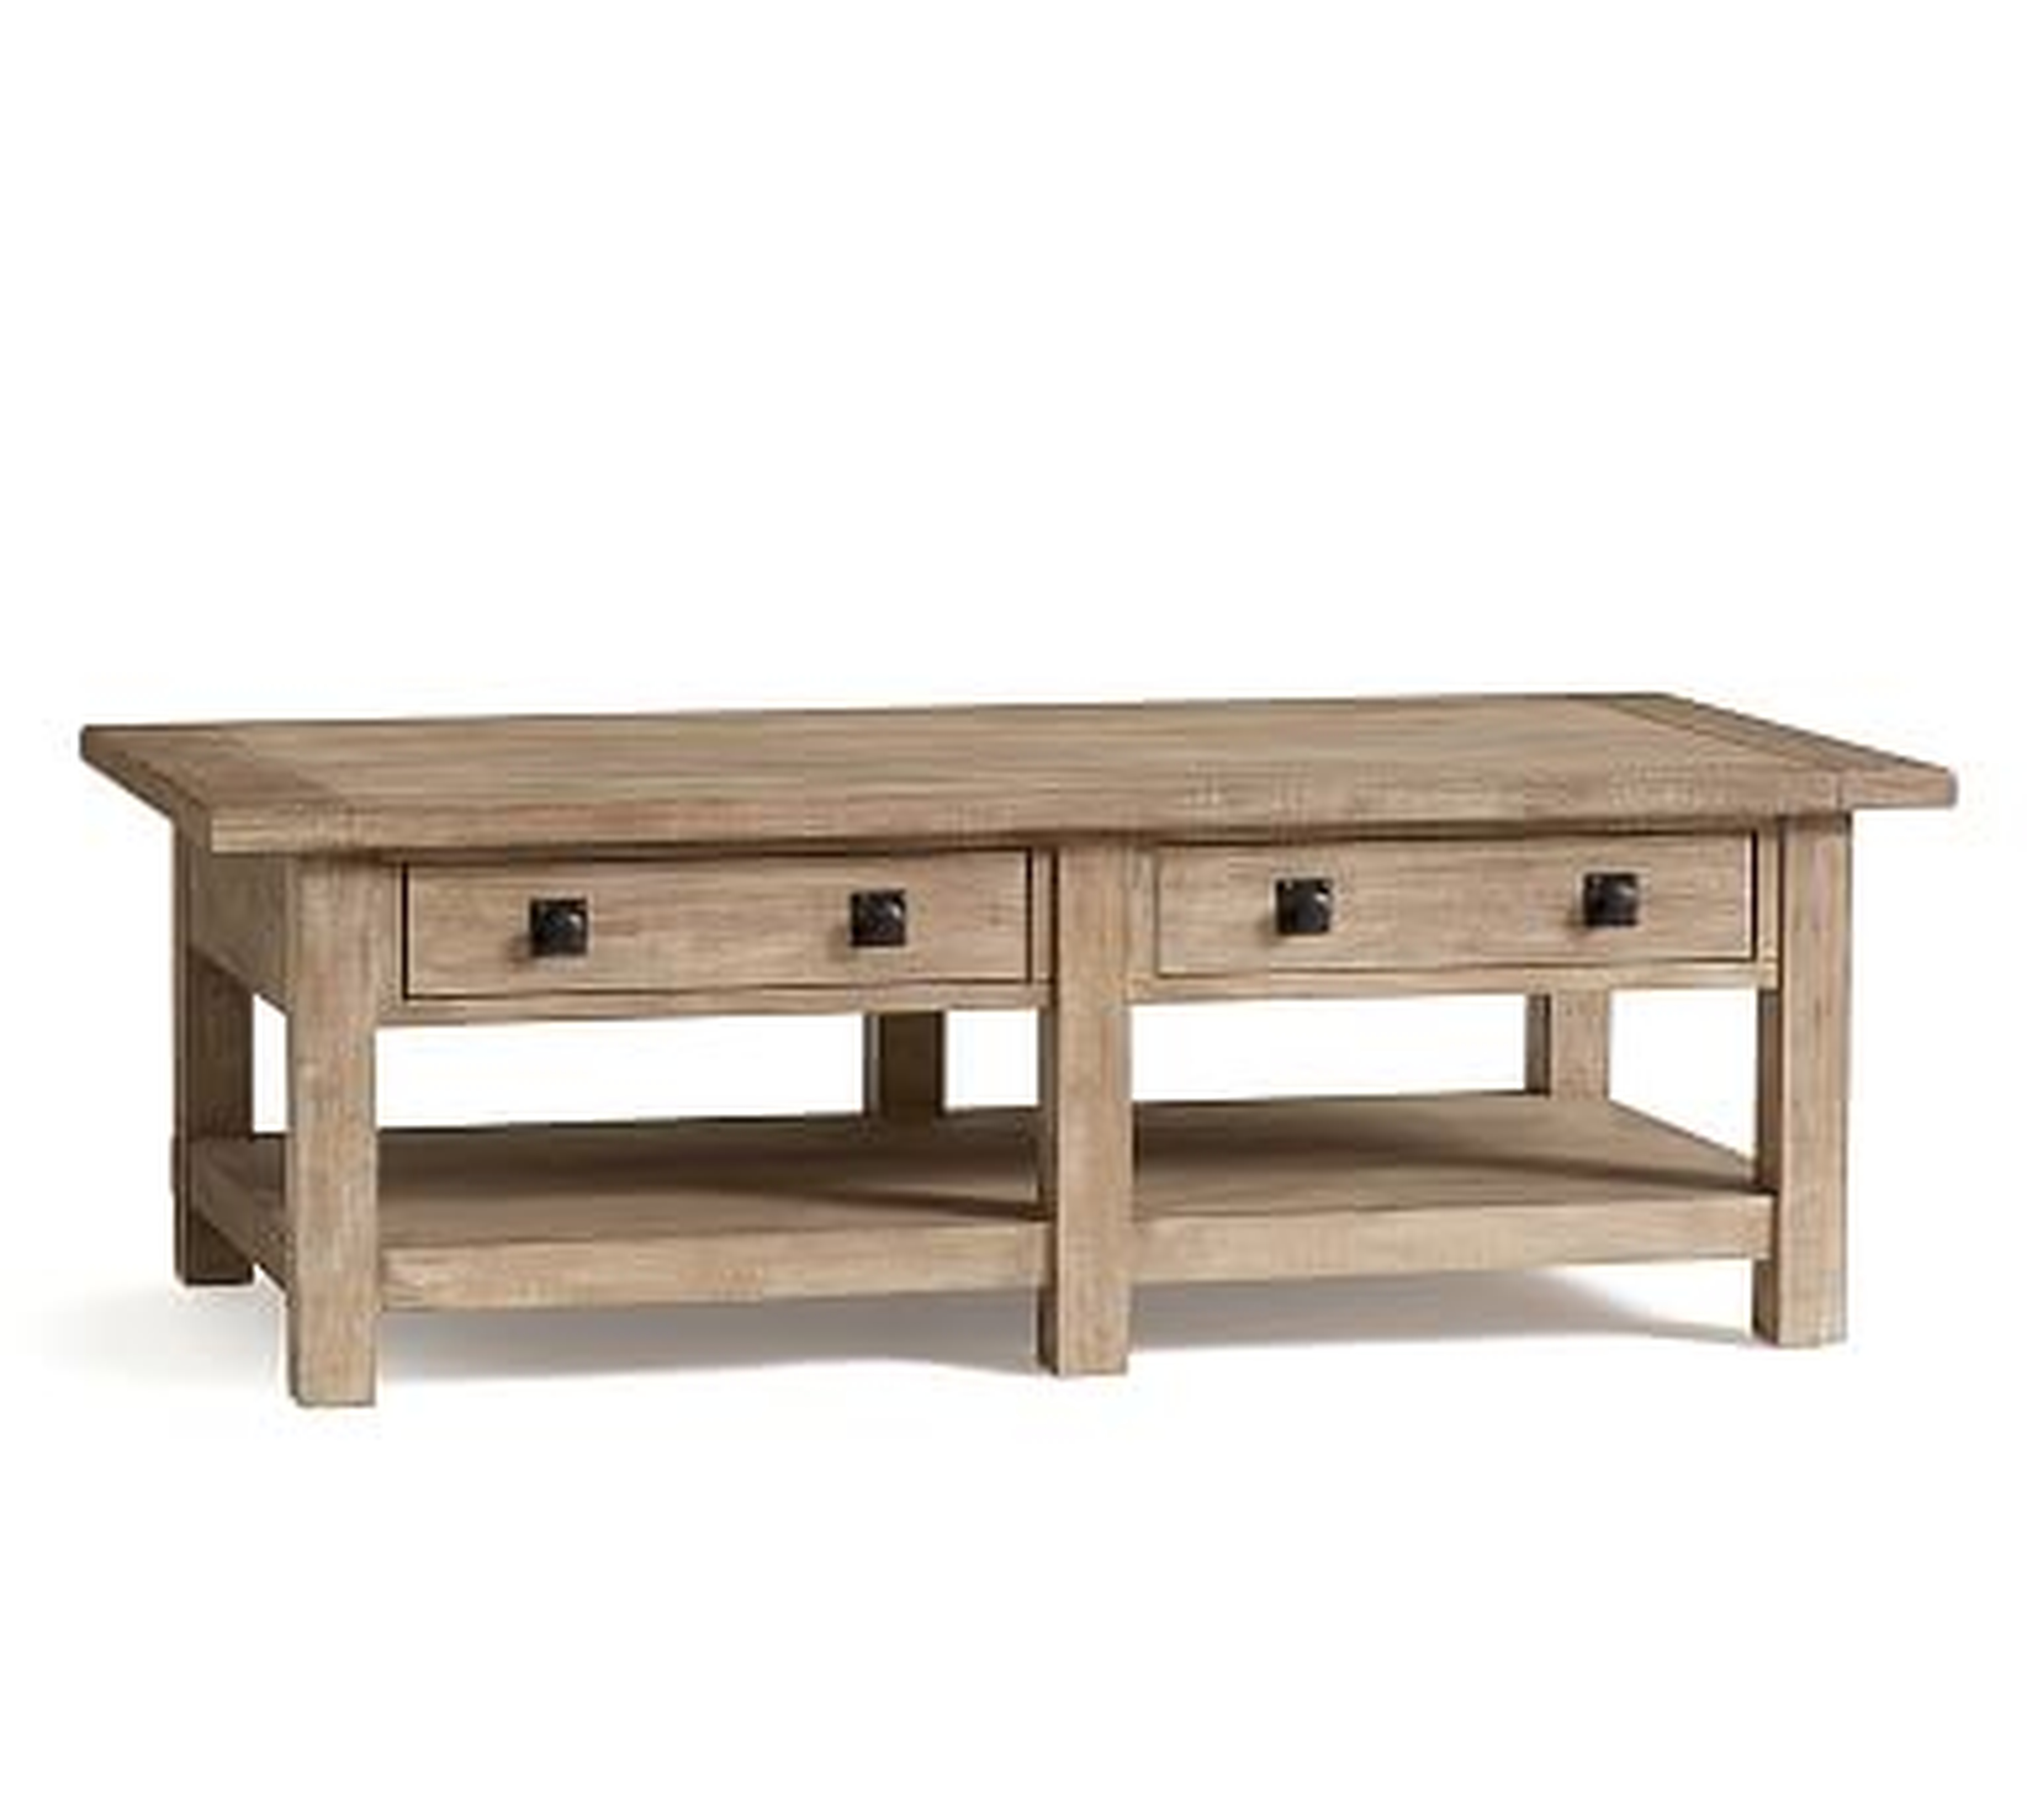 Benchwright Rectangular Wood Coffee Table with Drawers, Seadrift, 54"L - Pottery Barn